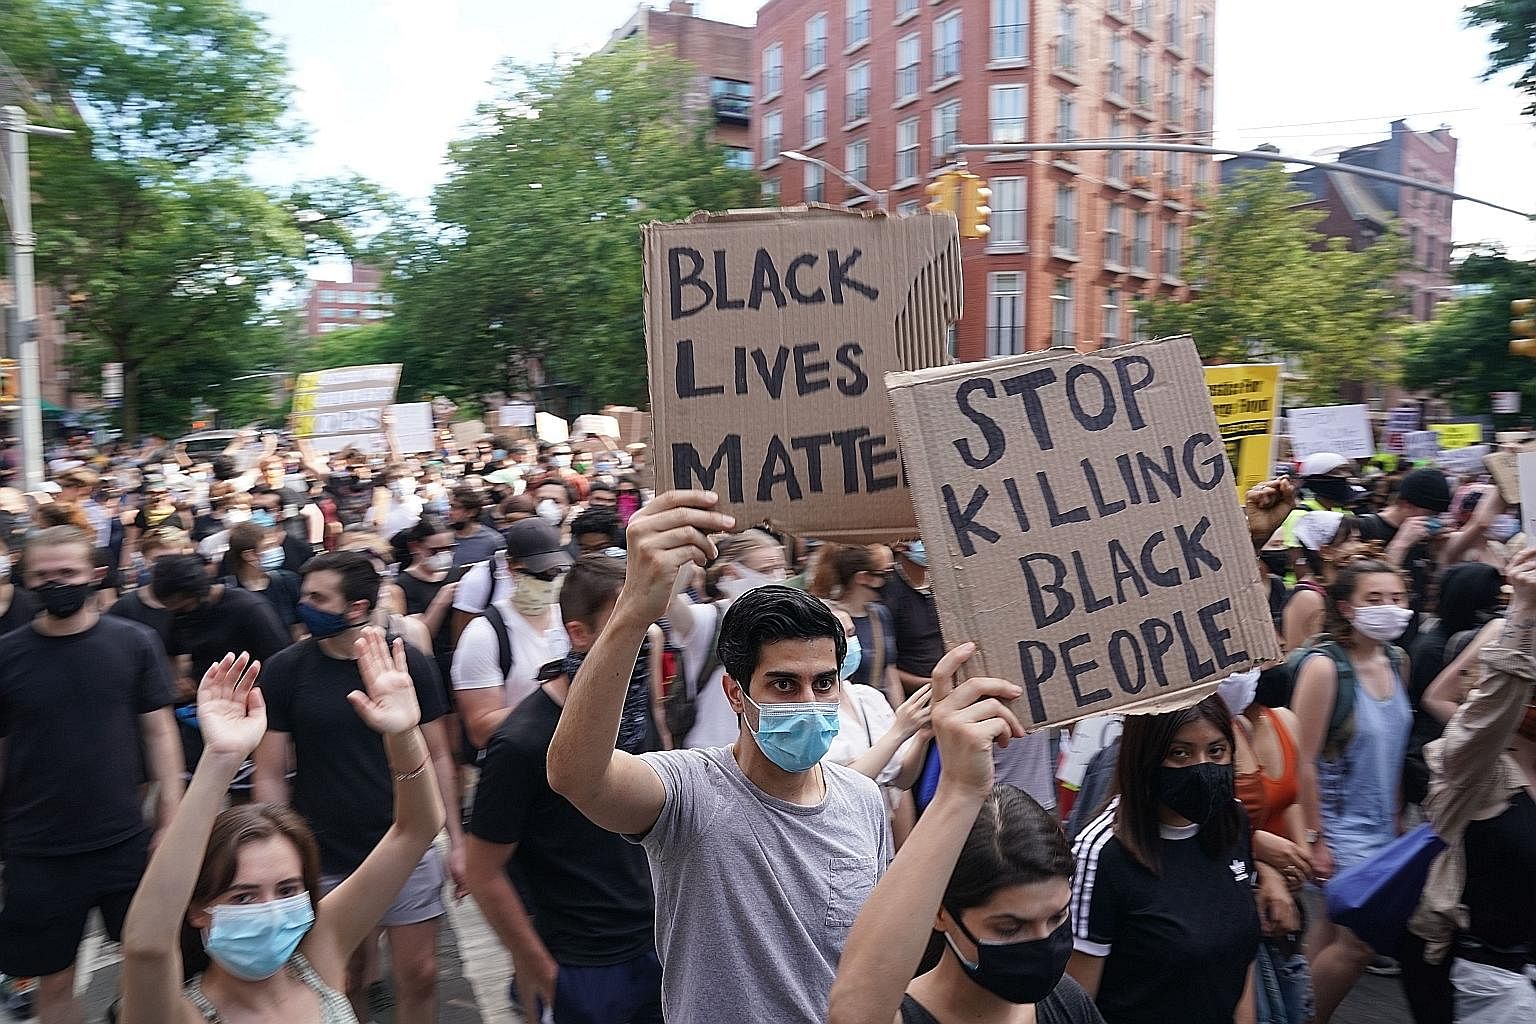 Demonstrators marching in New York City on Saturday as protests continued across the United States over the death of Mr George Floyd in Minneapolis, Minnesota. The African-American man was shown on video pleading that he could not breathe as a white 